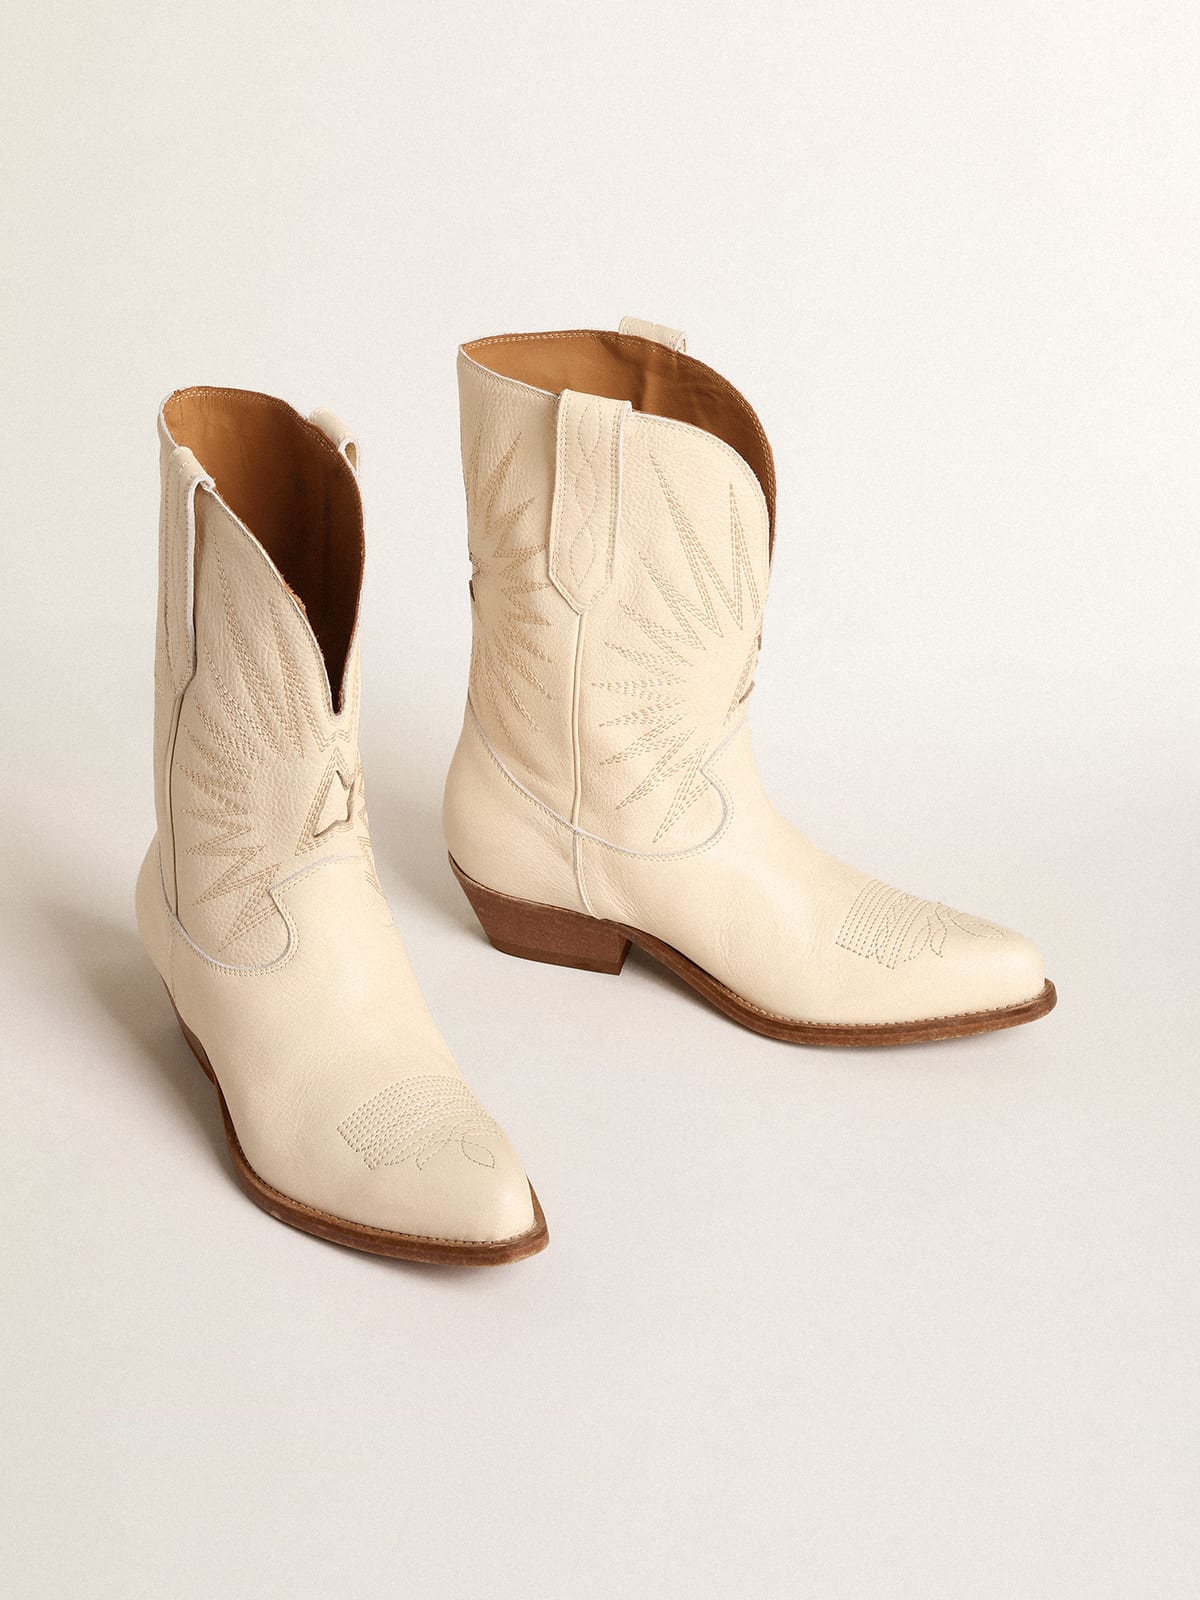 Golden Goose - Low Wish Star boots in cream-colored leather with inlay star in 